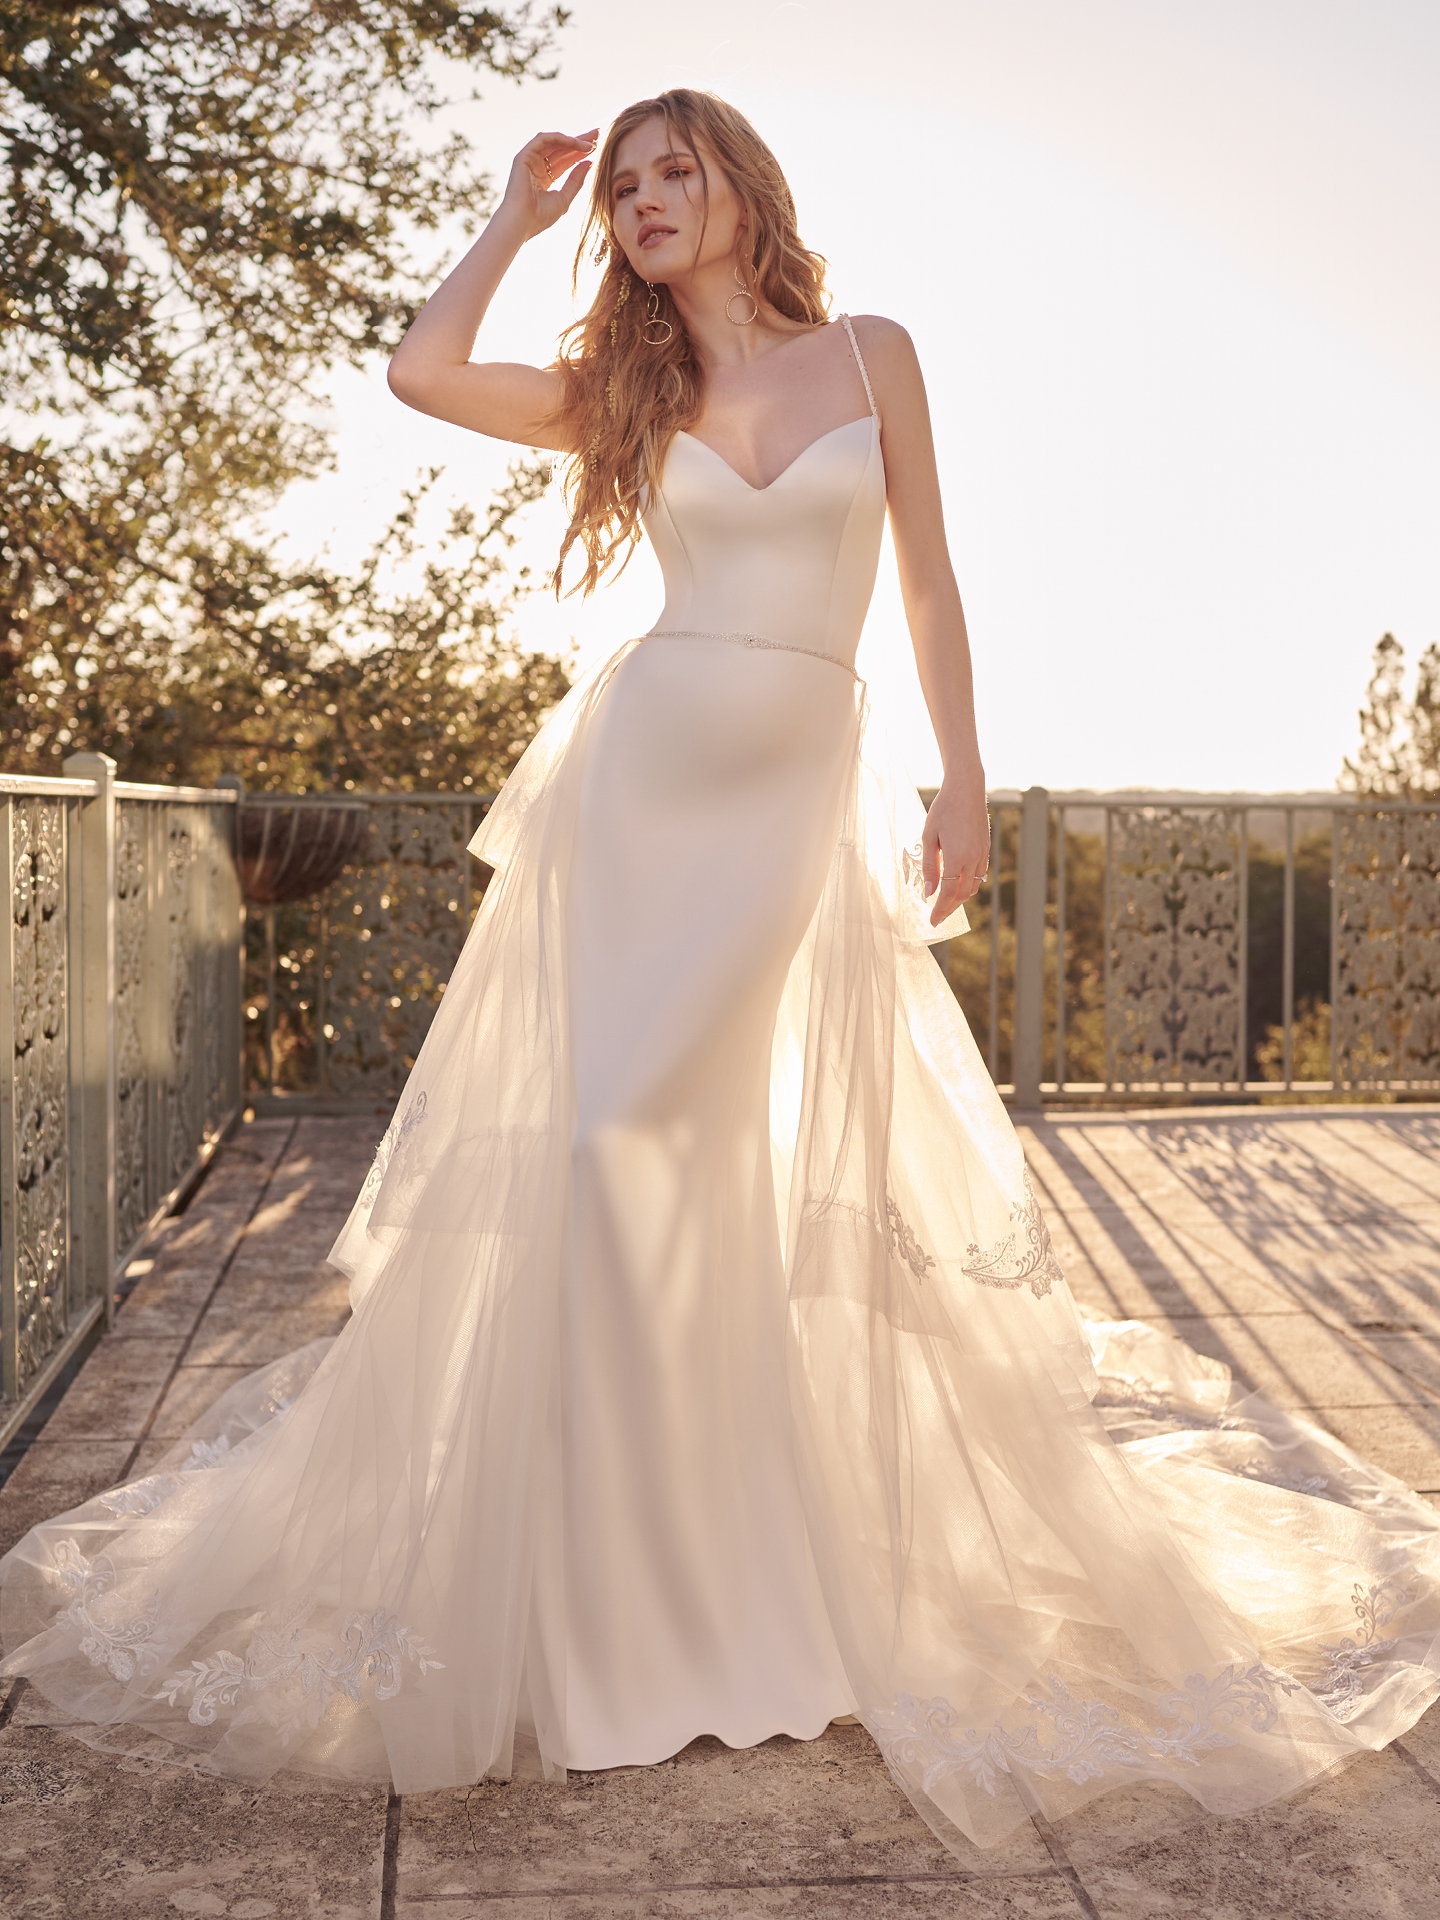 Bride In Simple Wedding Dress With Satin Called Dinah By Rebecca Ingram